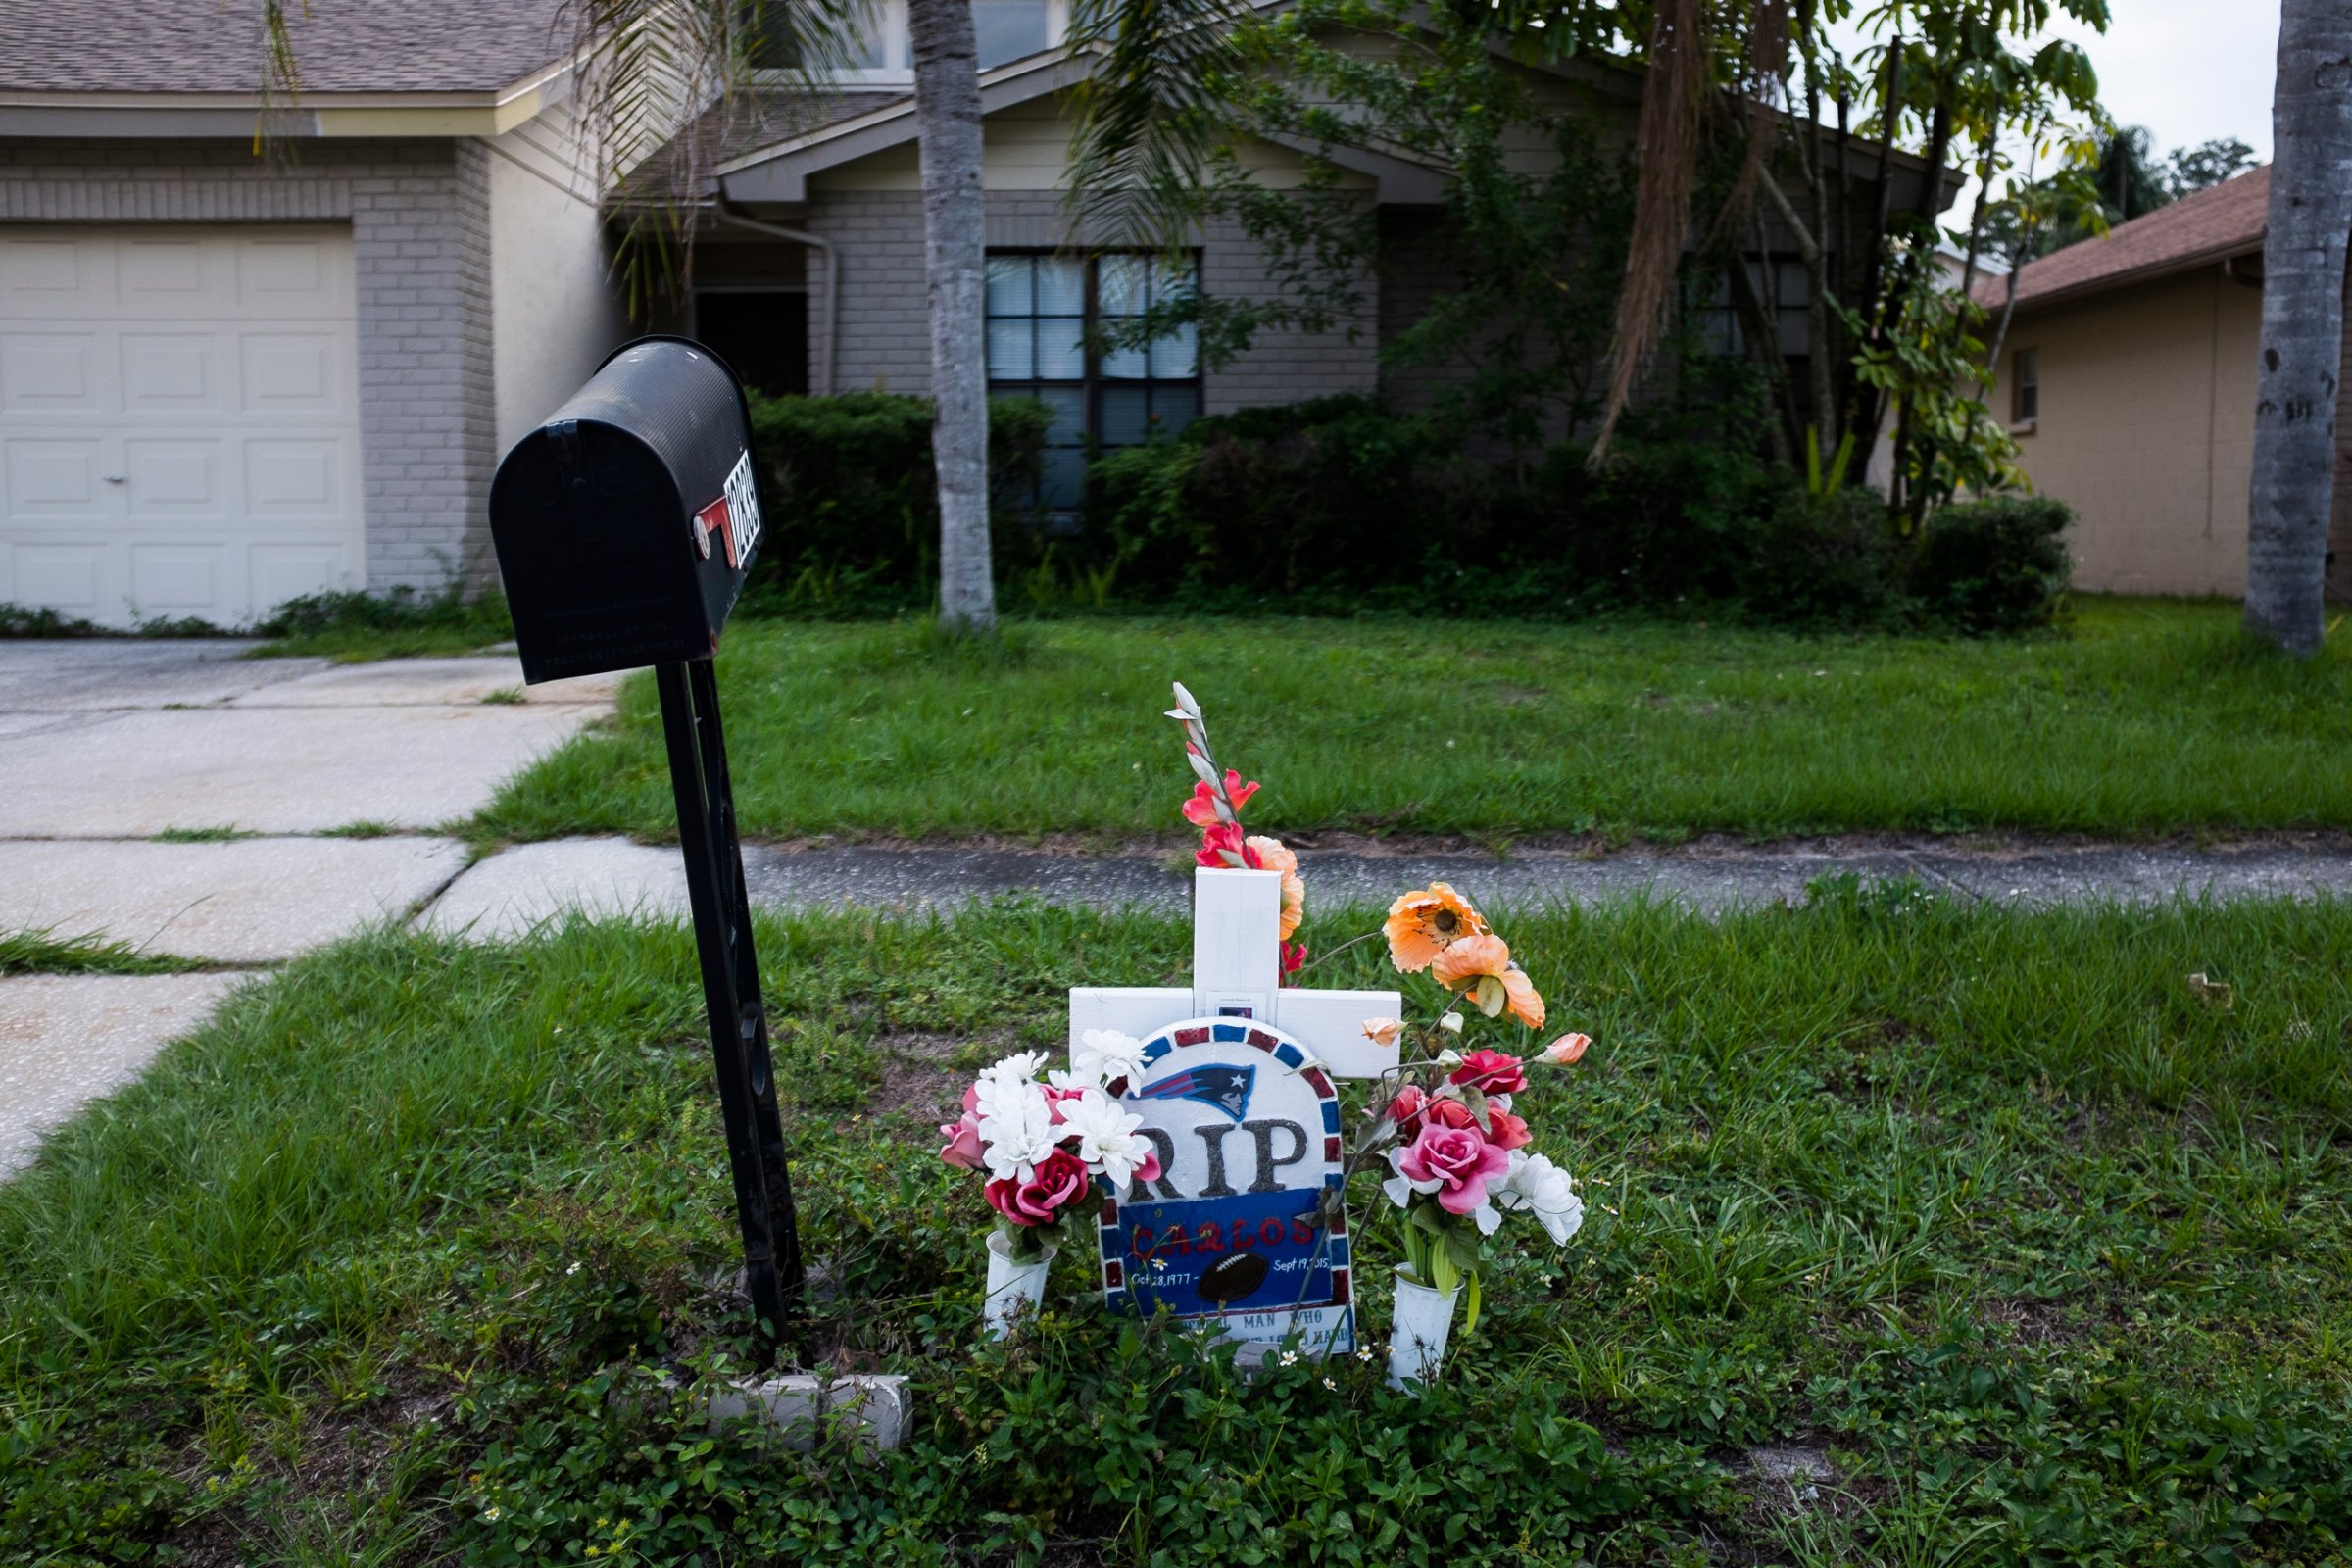 This Sept. 15, 2016 photo shows a memorial for Carlos Garica which has sat outside Yaileen Ayala's home for the last year. It marks where her ex-husband died after he was shot following an argument with a neighbor. (Zack Wittman/The Tampa Bay Times via AP)